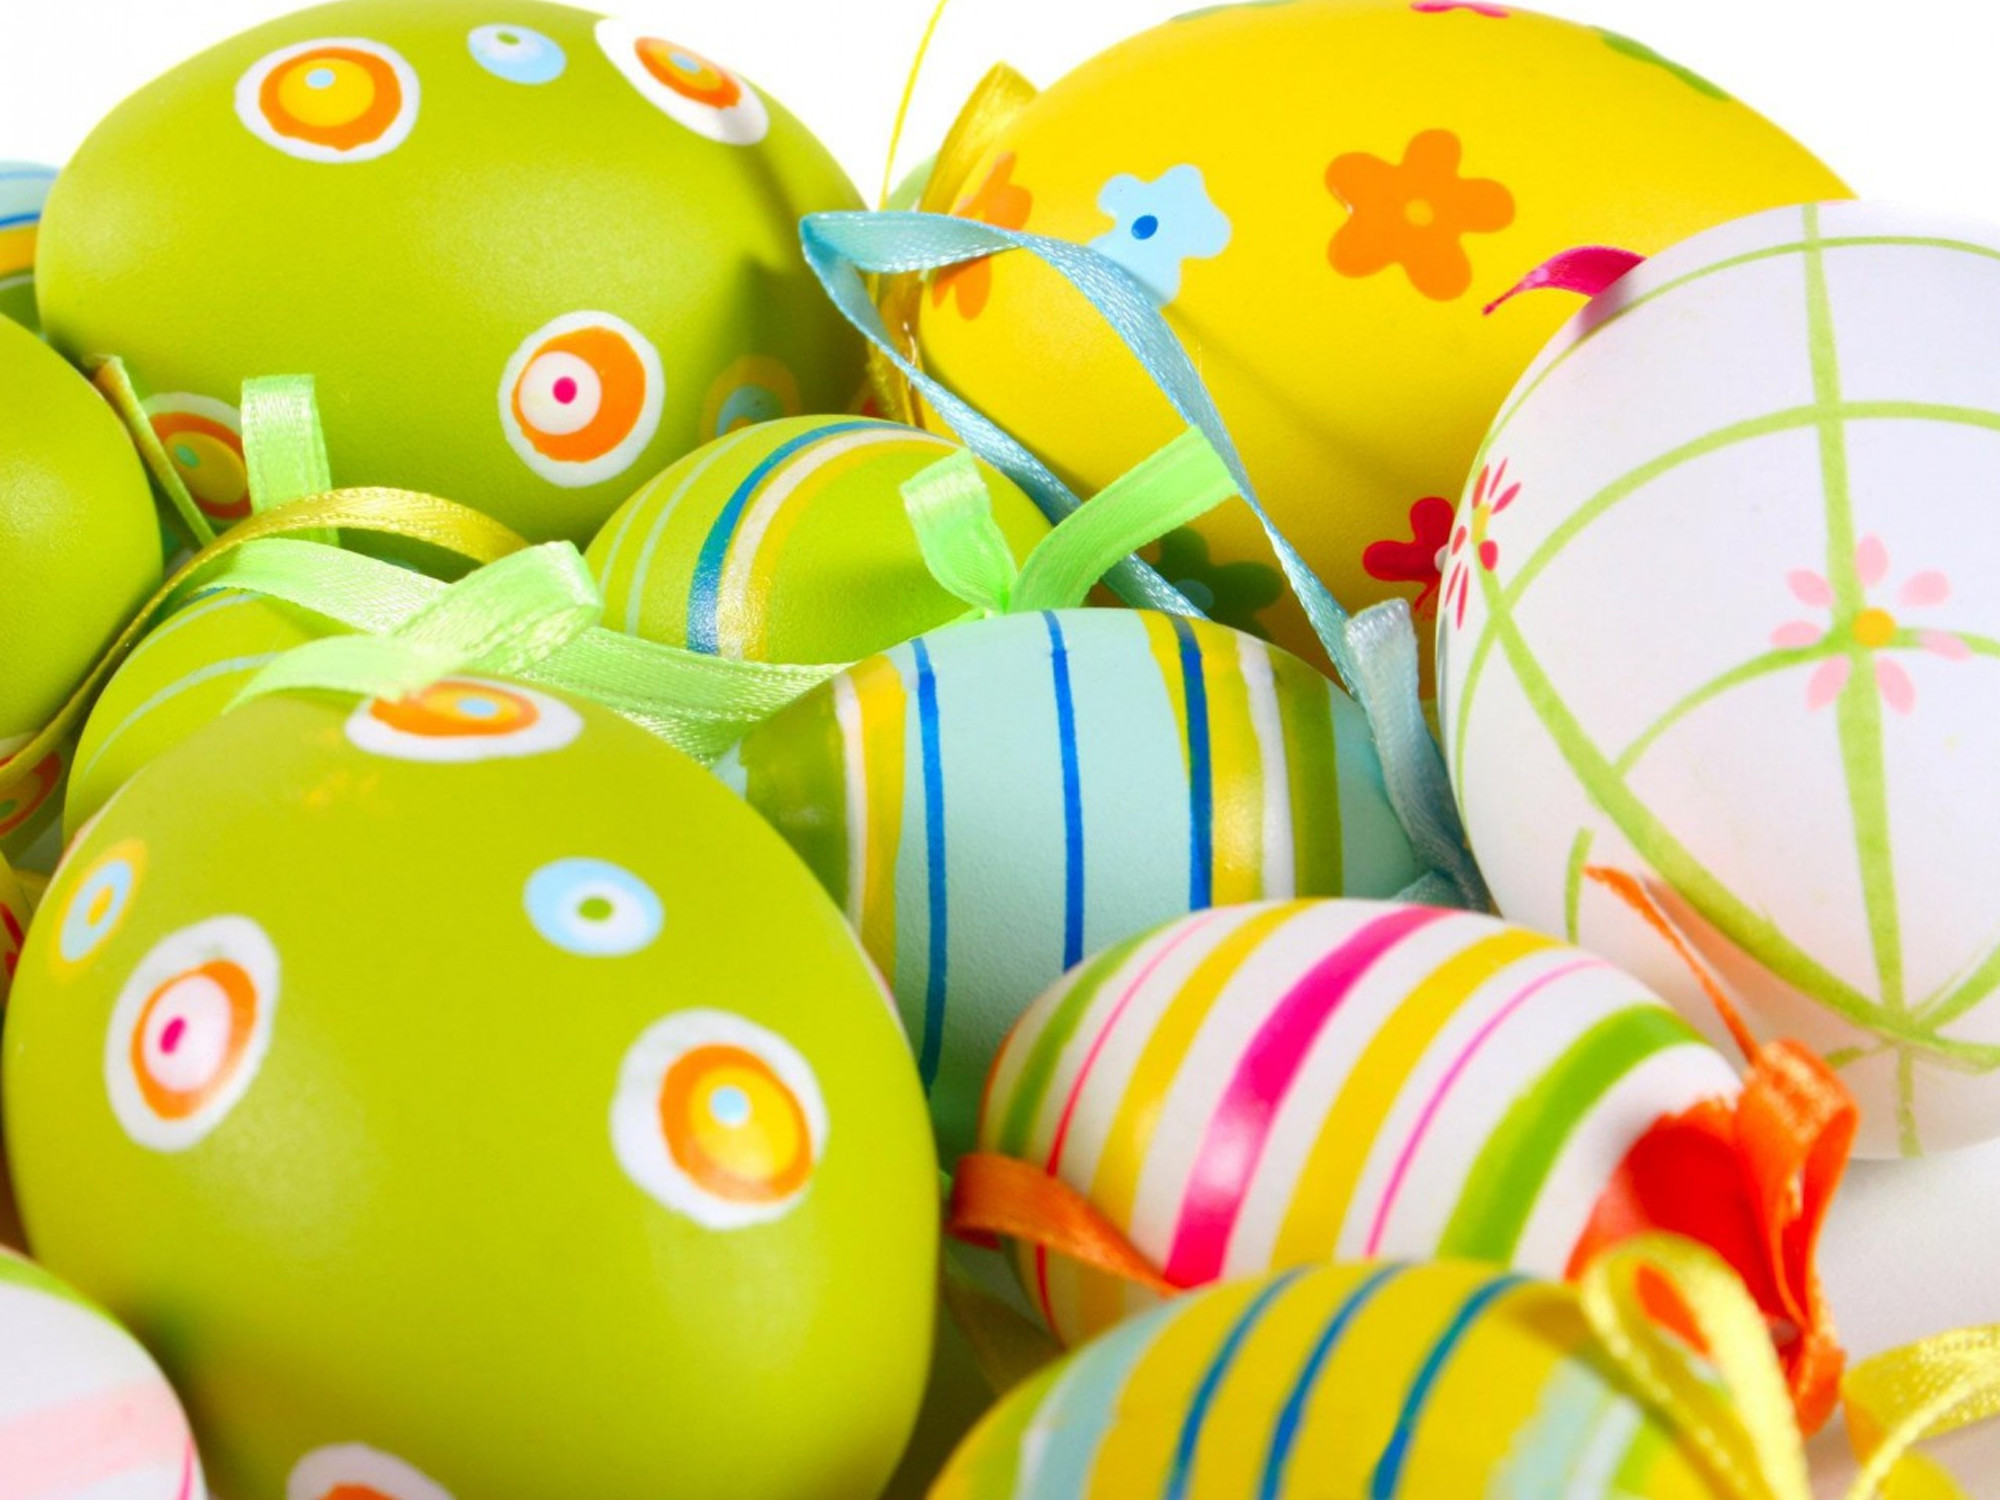 2000x1500 Yellow and multicolored Easter egg wallpaper